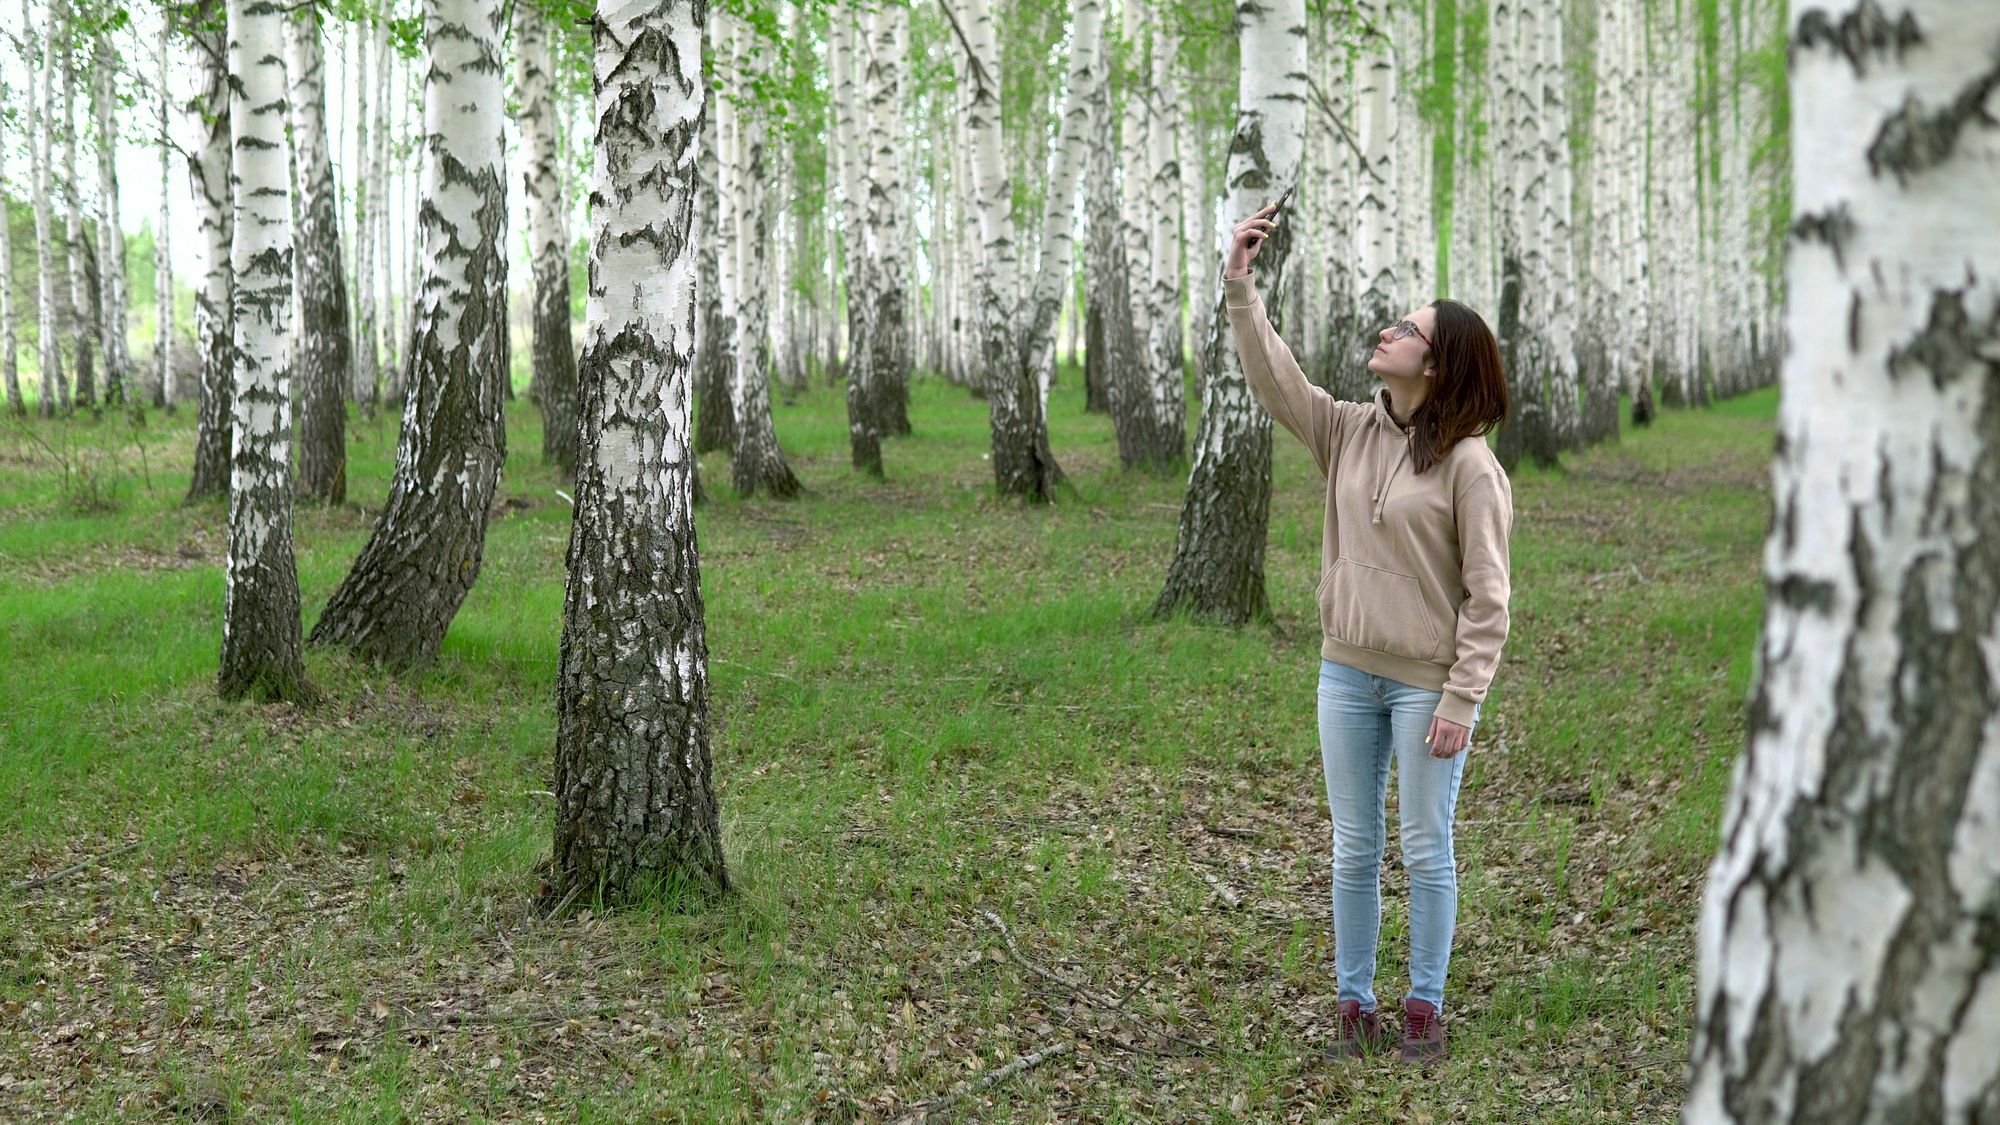 A person looking for a cellular signal in a birch forest.